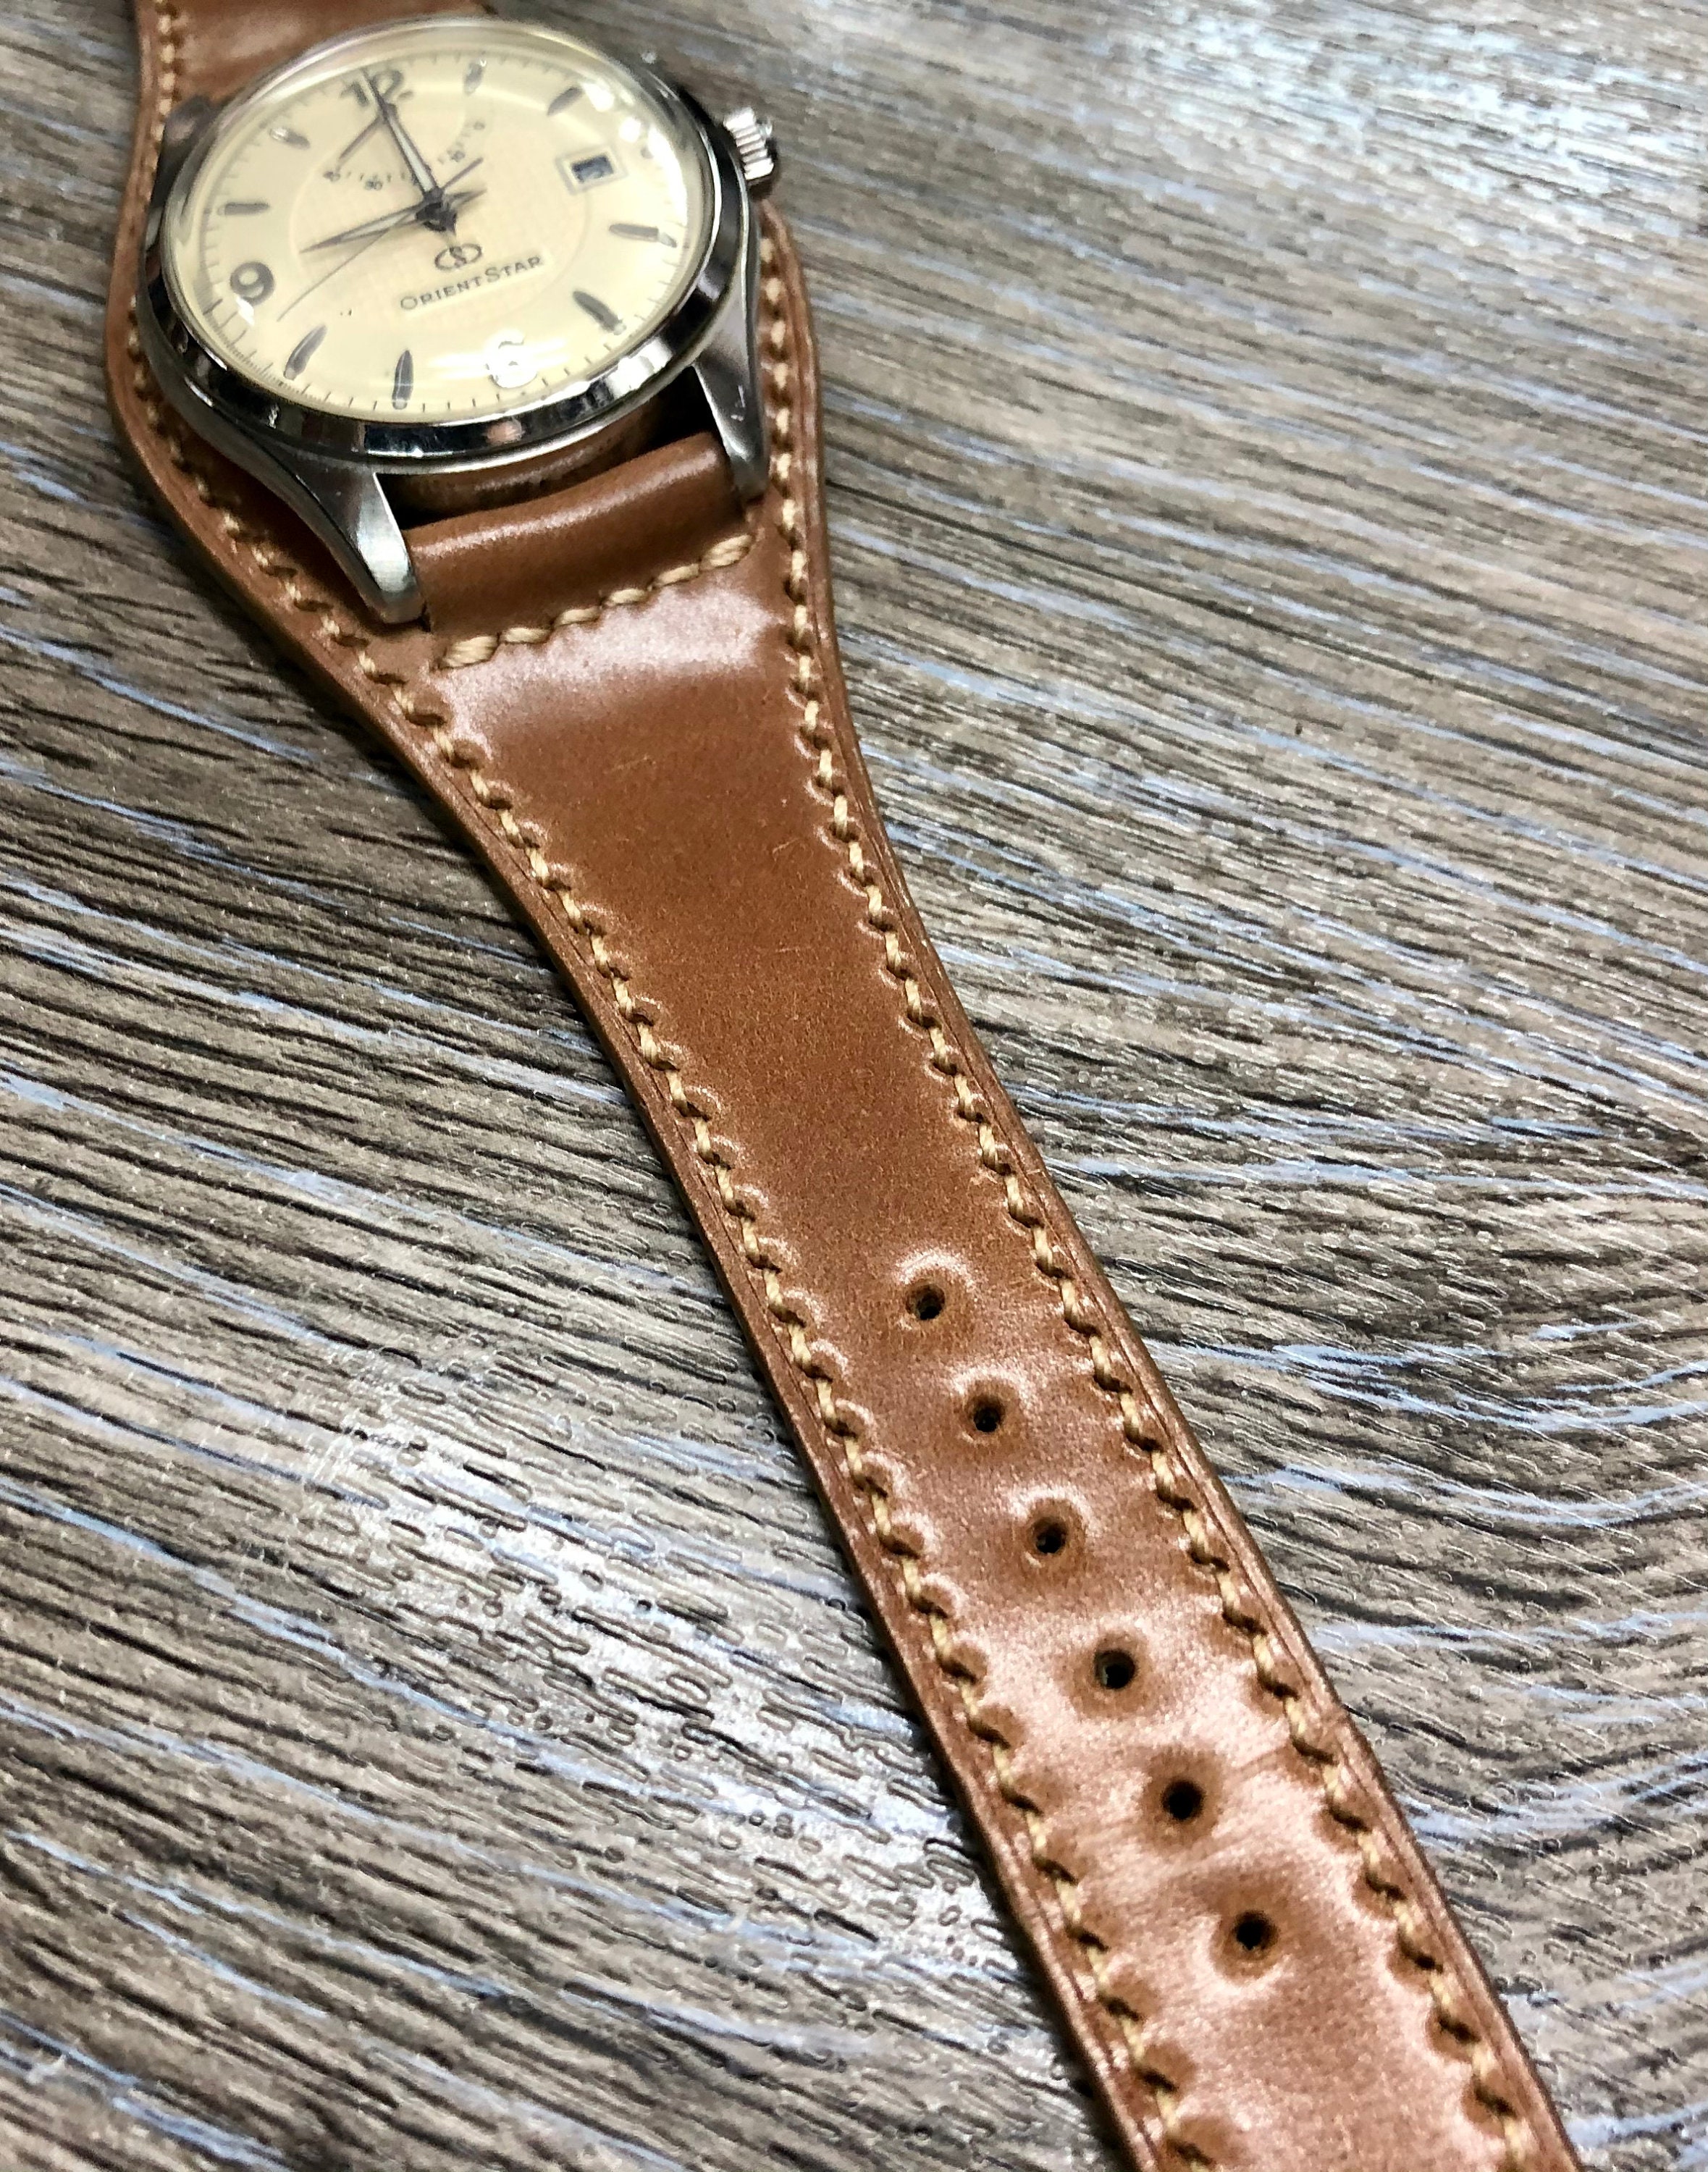 Shell Cordovan Full Bund Leather Watch Straps Leather Watch | Etsy